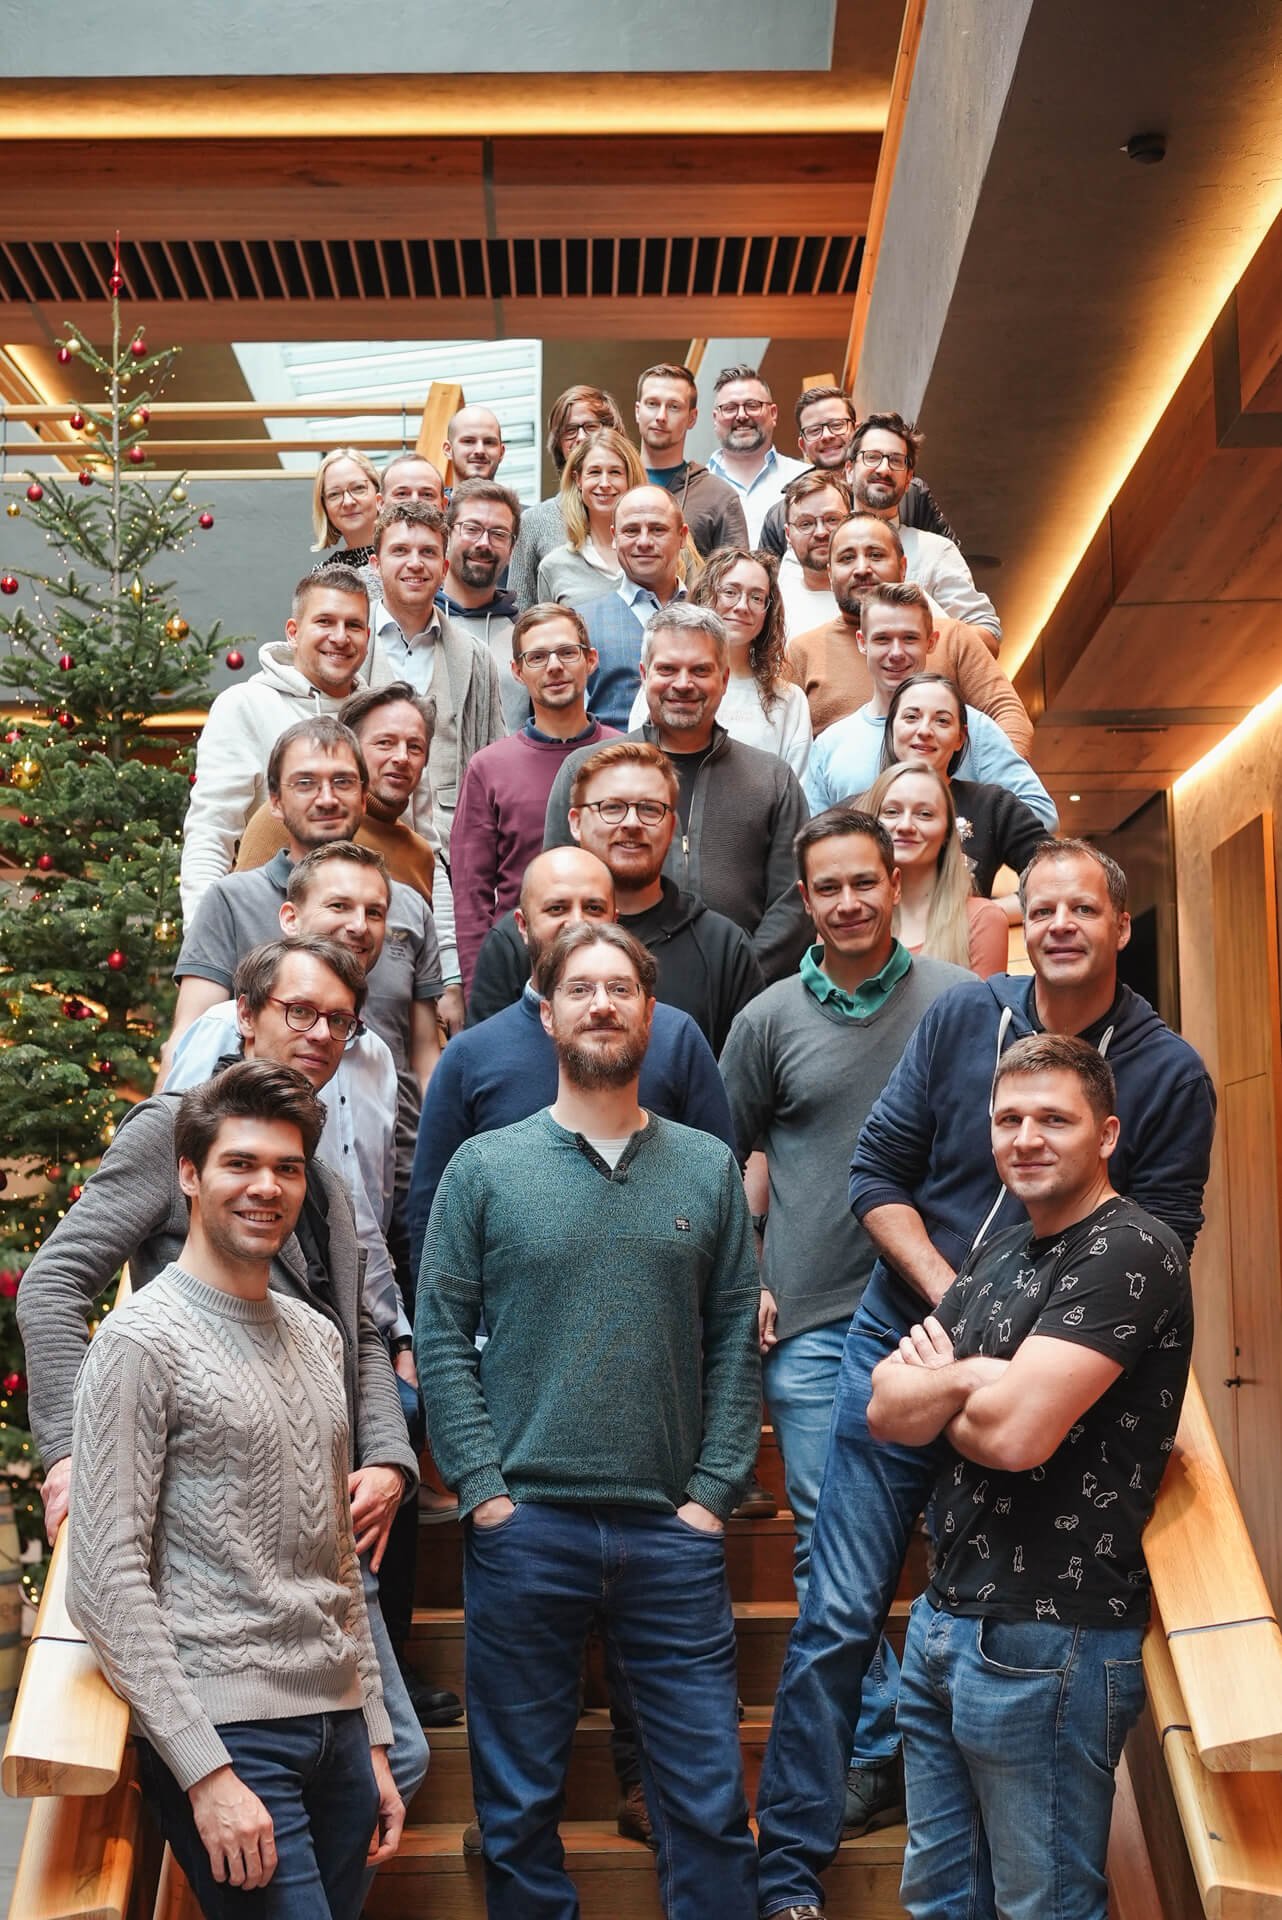 The Trustbit team posing during our 2022 company offsite, with a Christmas tree in the background